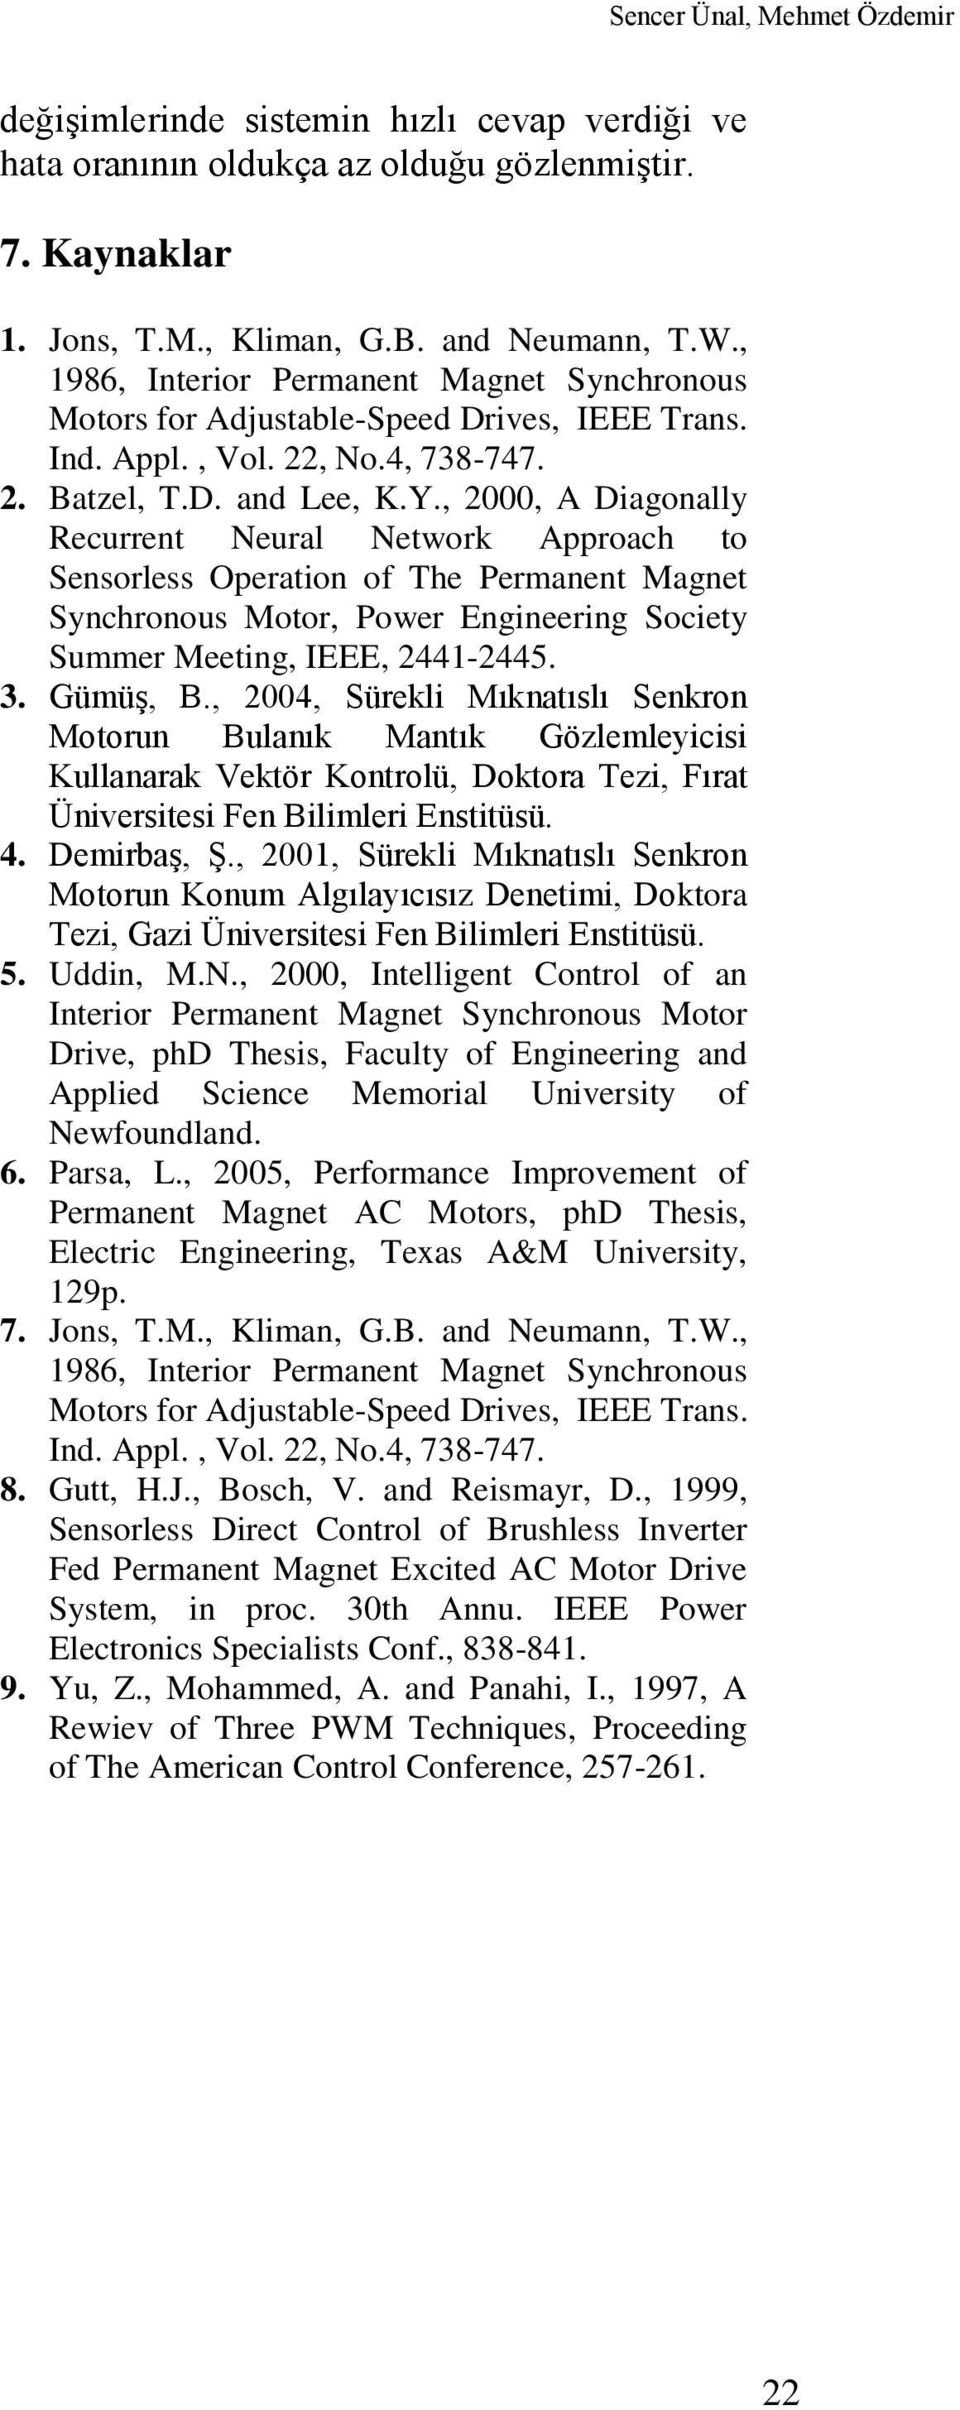 , 2000, A Diagonally Recurrent Neural Network Approach to Sensorless Operation of The Permanent Magnet Synchronous Motor, Power Engineering Society Summer Meeting, IEEE, 2441-2445. 3. Gümüş, B.